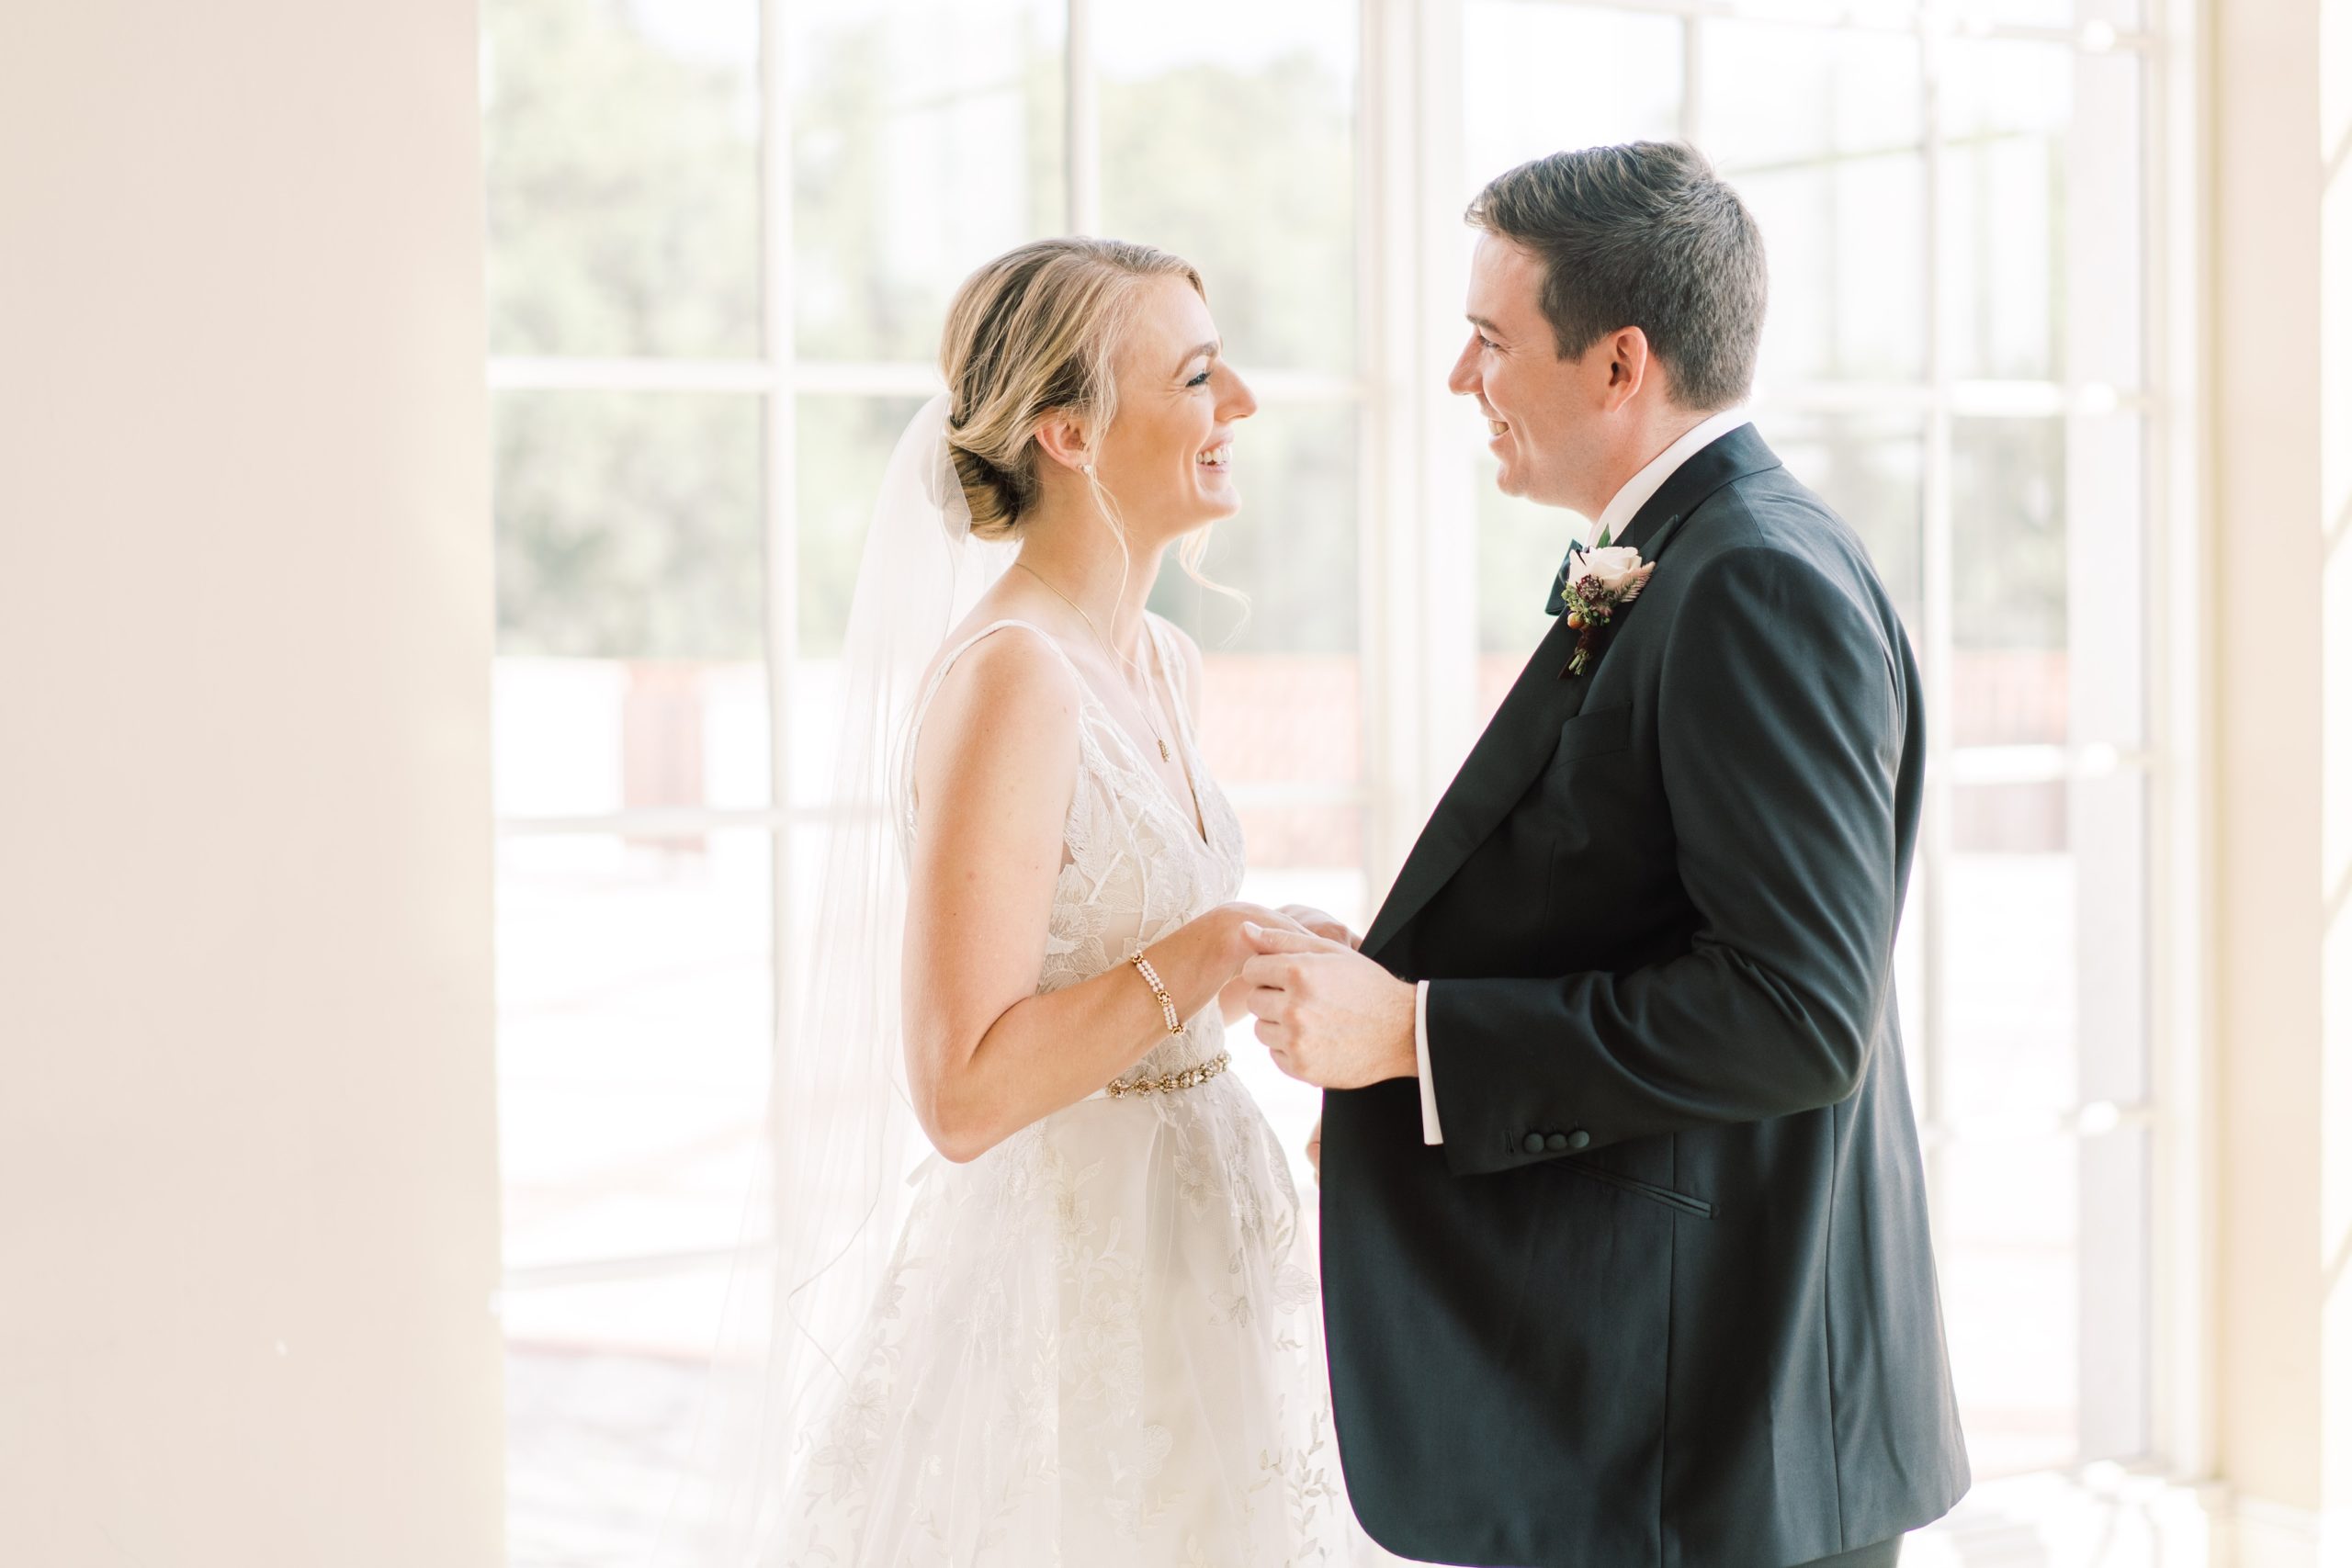 This Washington DC area wedding photographer provides information on a wedding day first look for engaged couples.